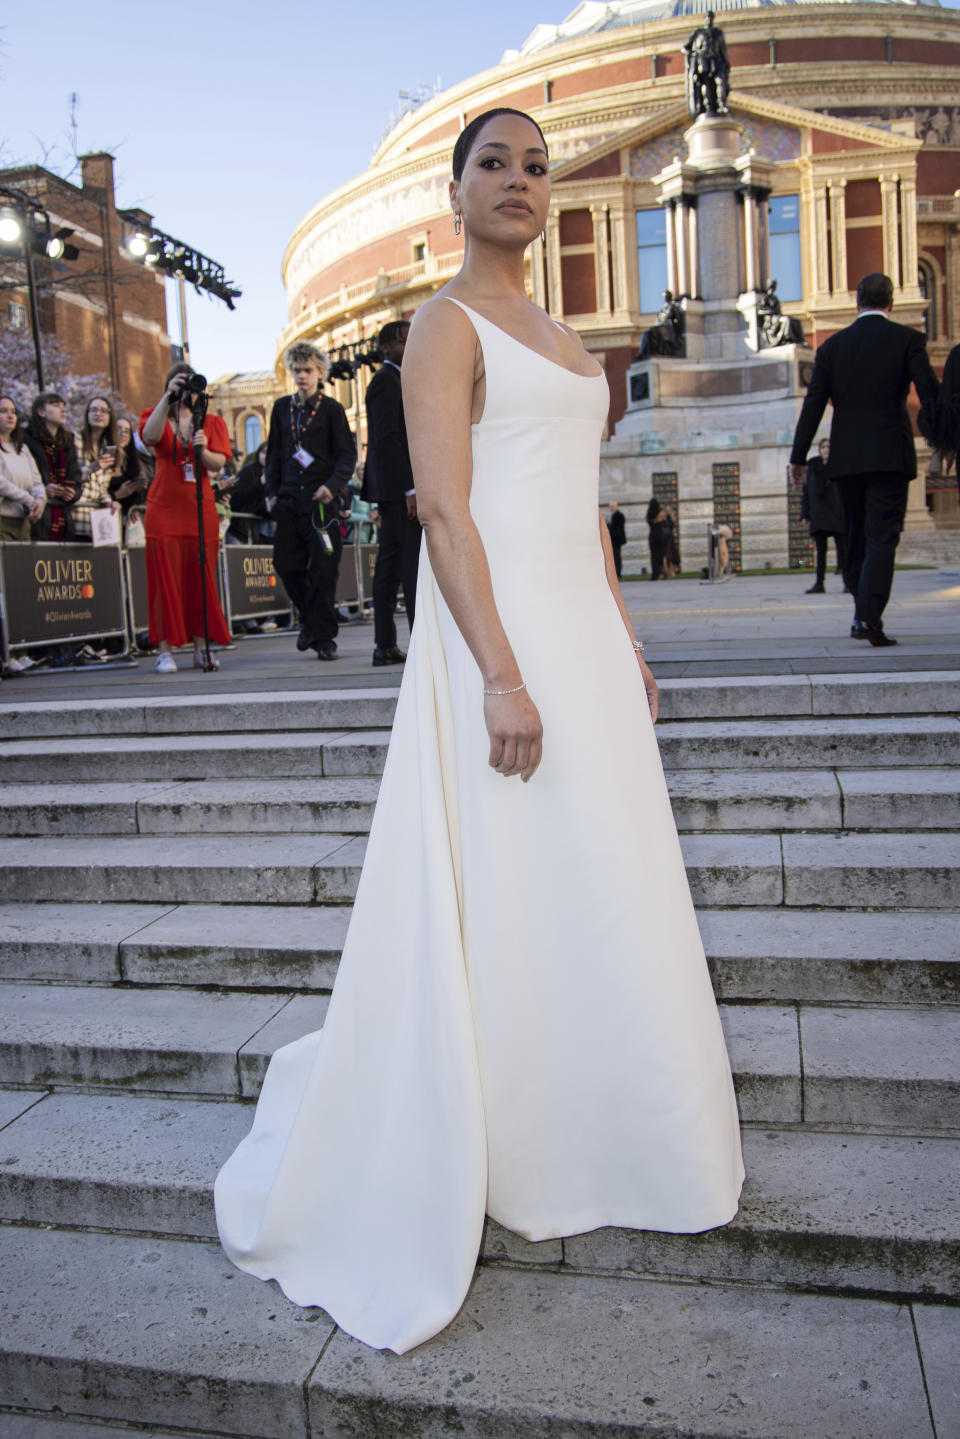 Cush Jumbo poses for photographers upon arrival at the Olivier Awards in London, Sunday, April 2, 2023. (Photo by Vianney Le Caer/Invision/AP)